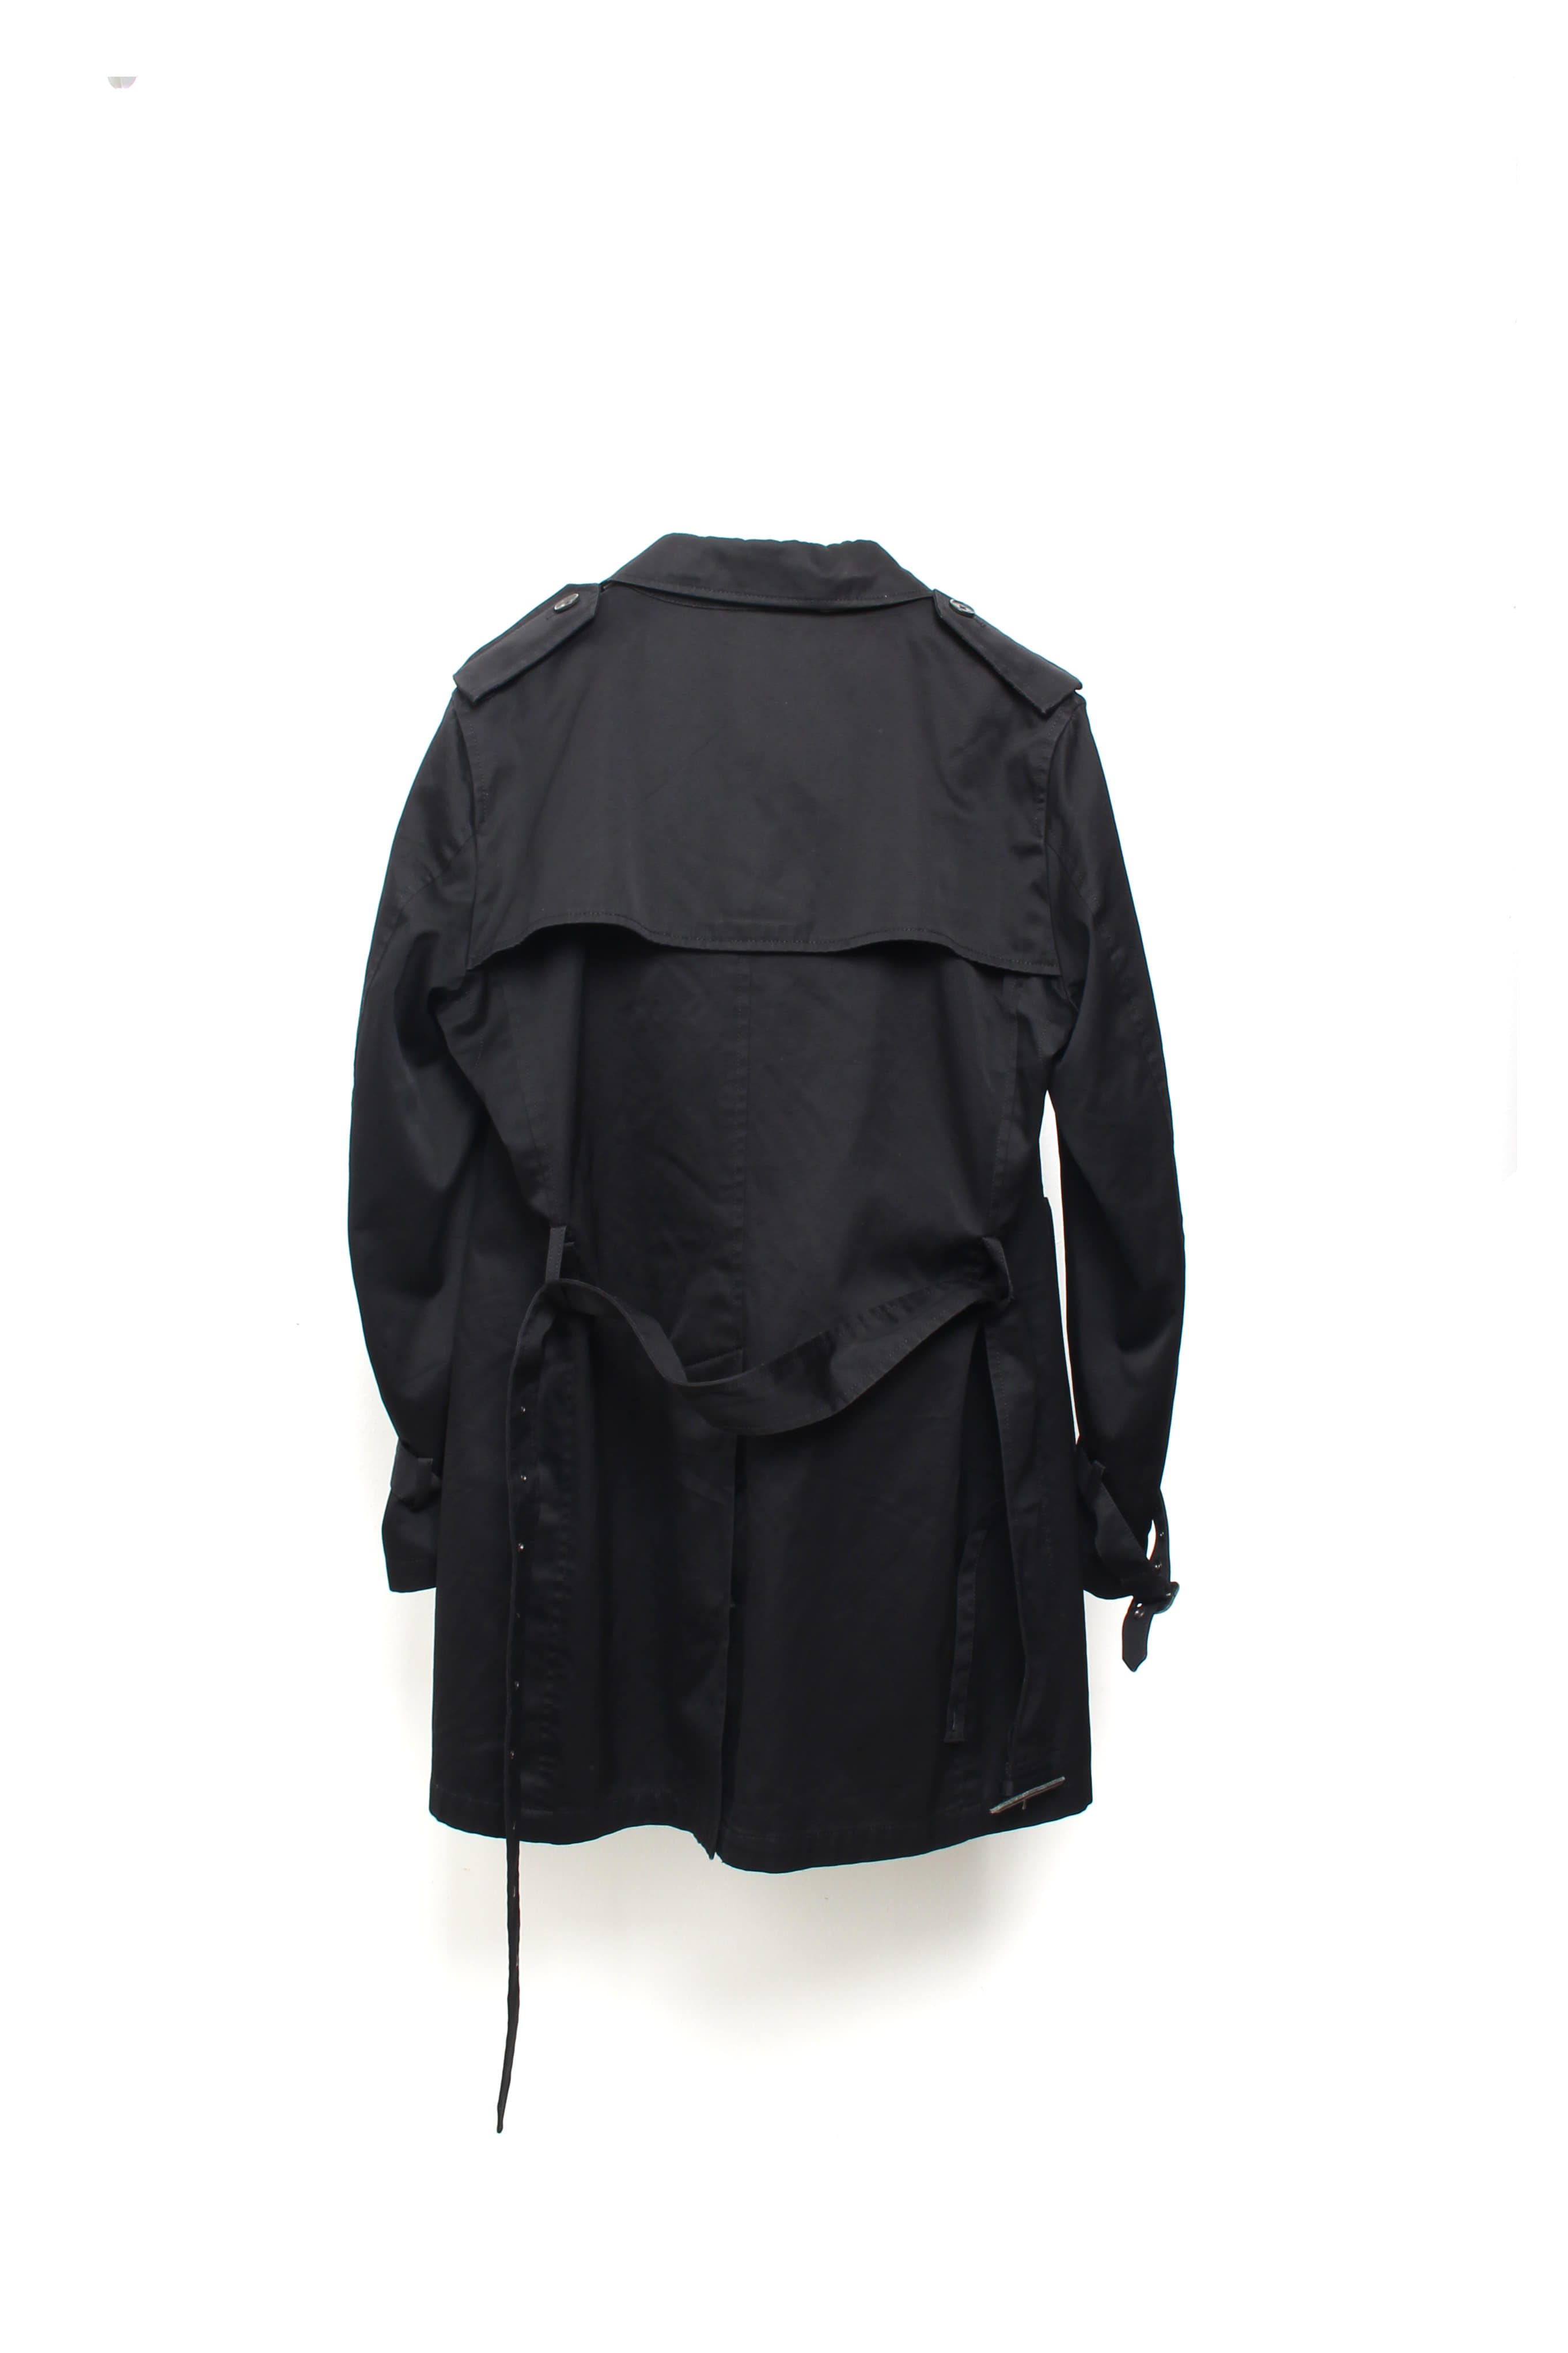 UNITED ARROWS TOKYO Trench Coat